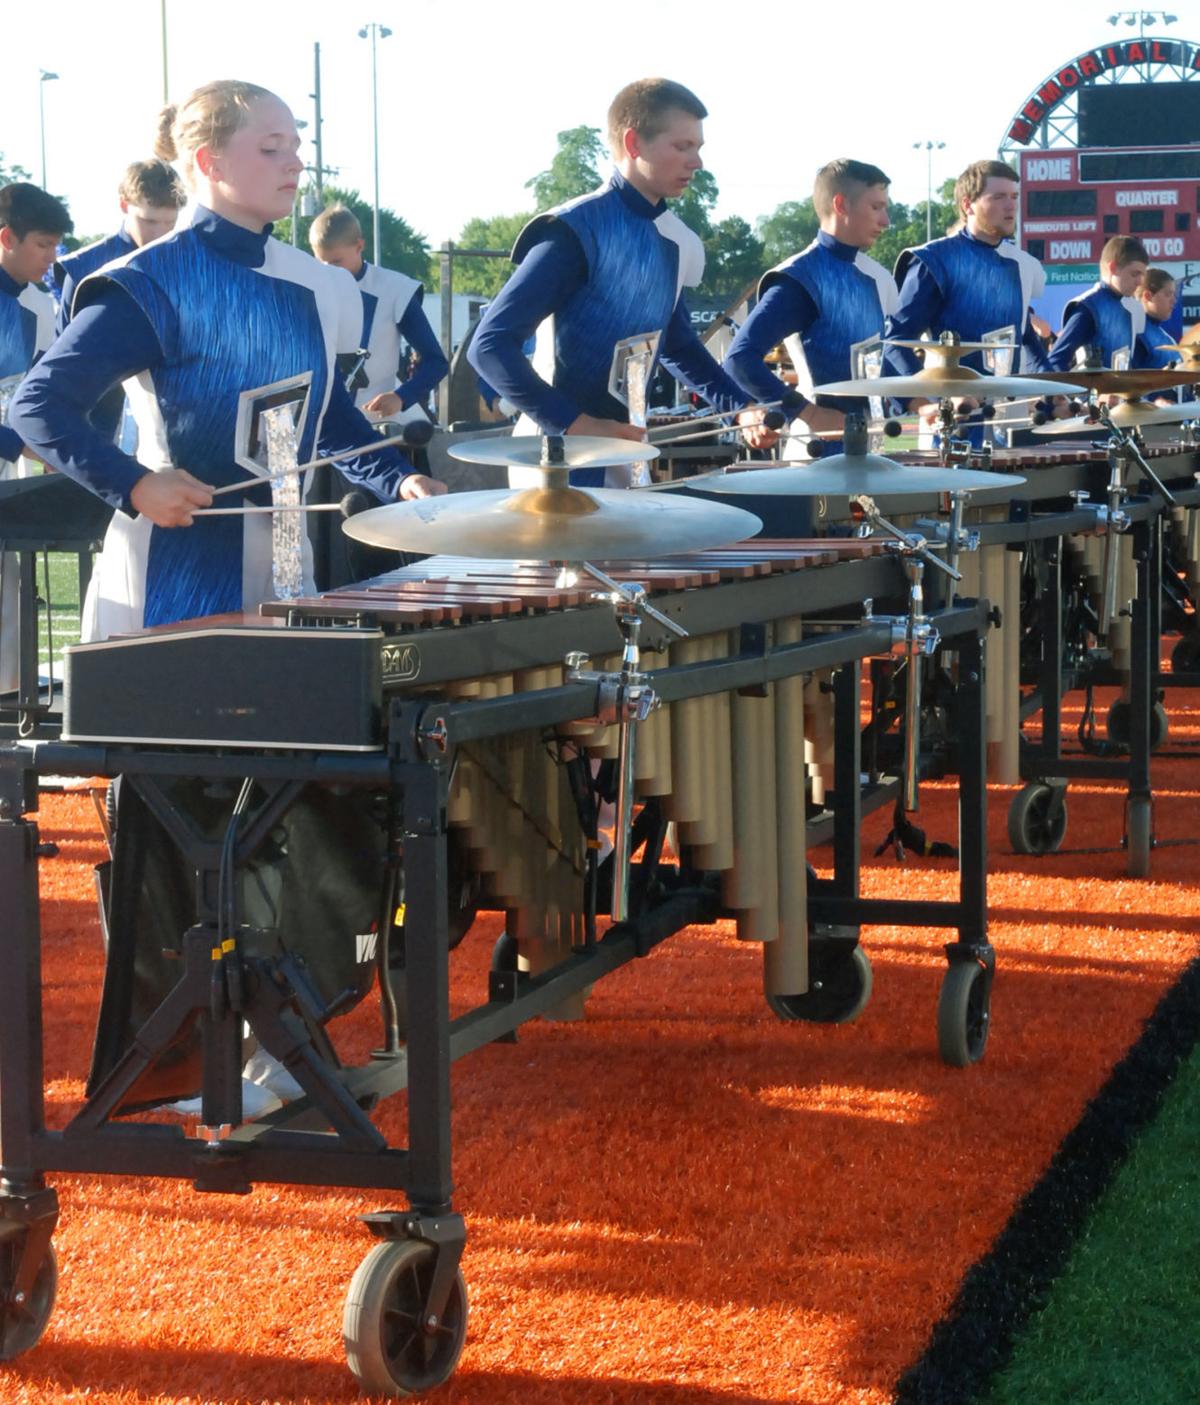 Top drum corps offers electrifying performances at Heedum Field Local